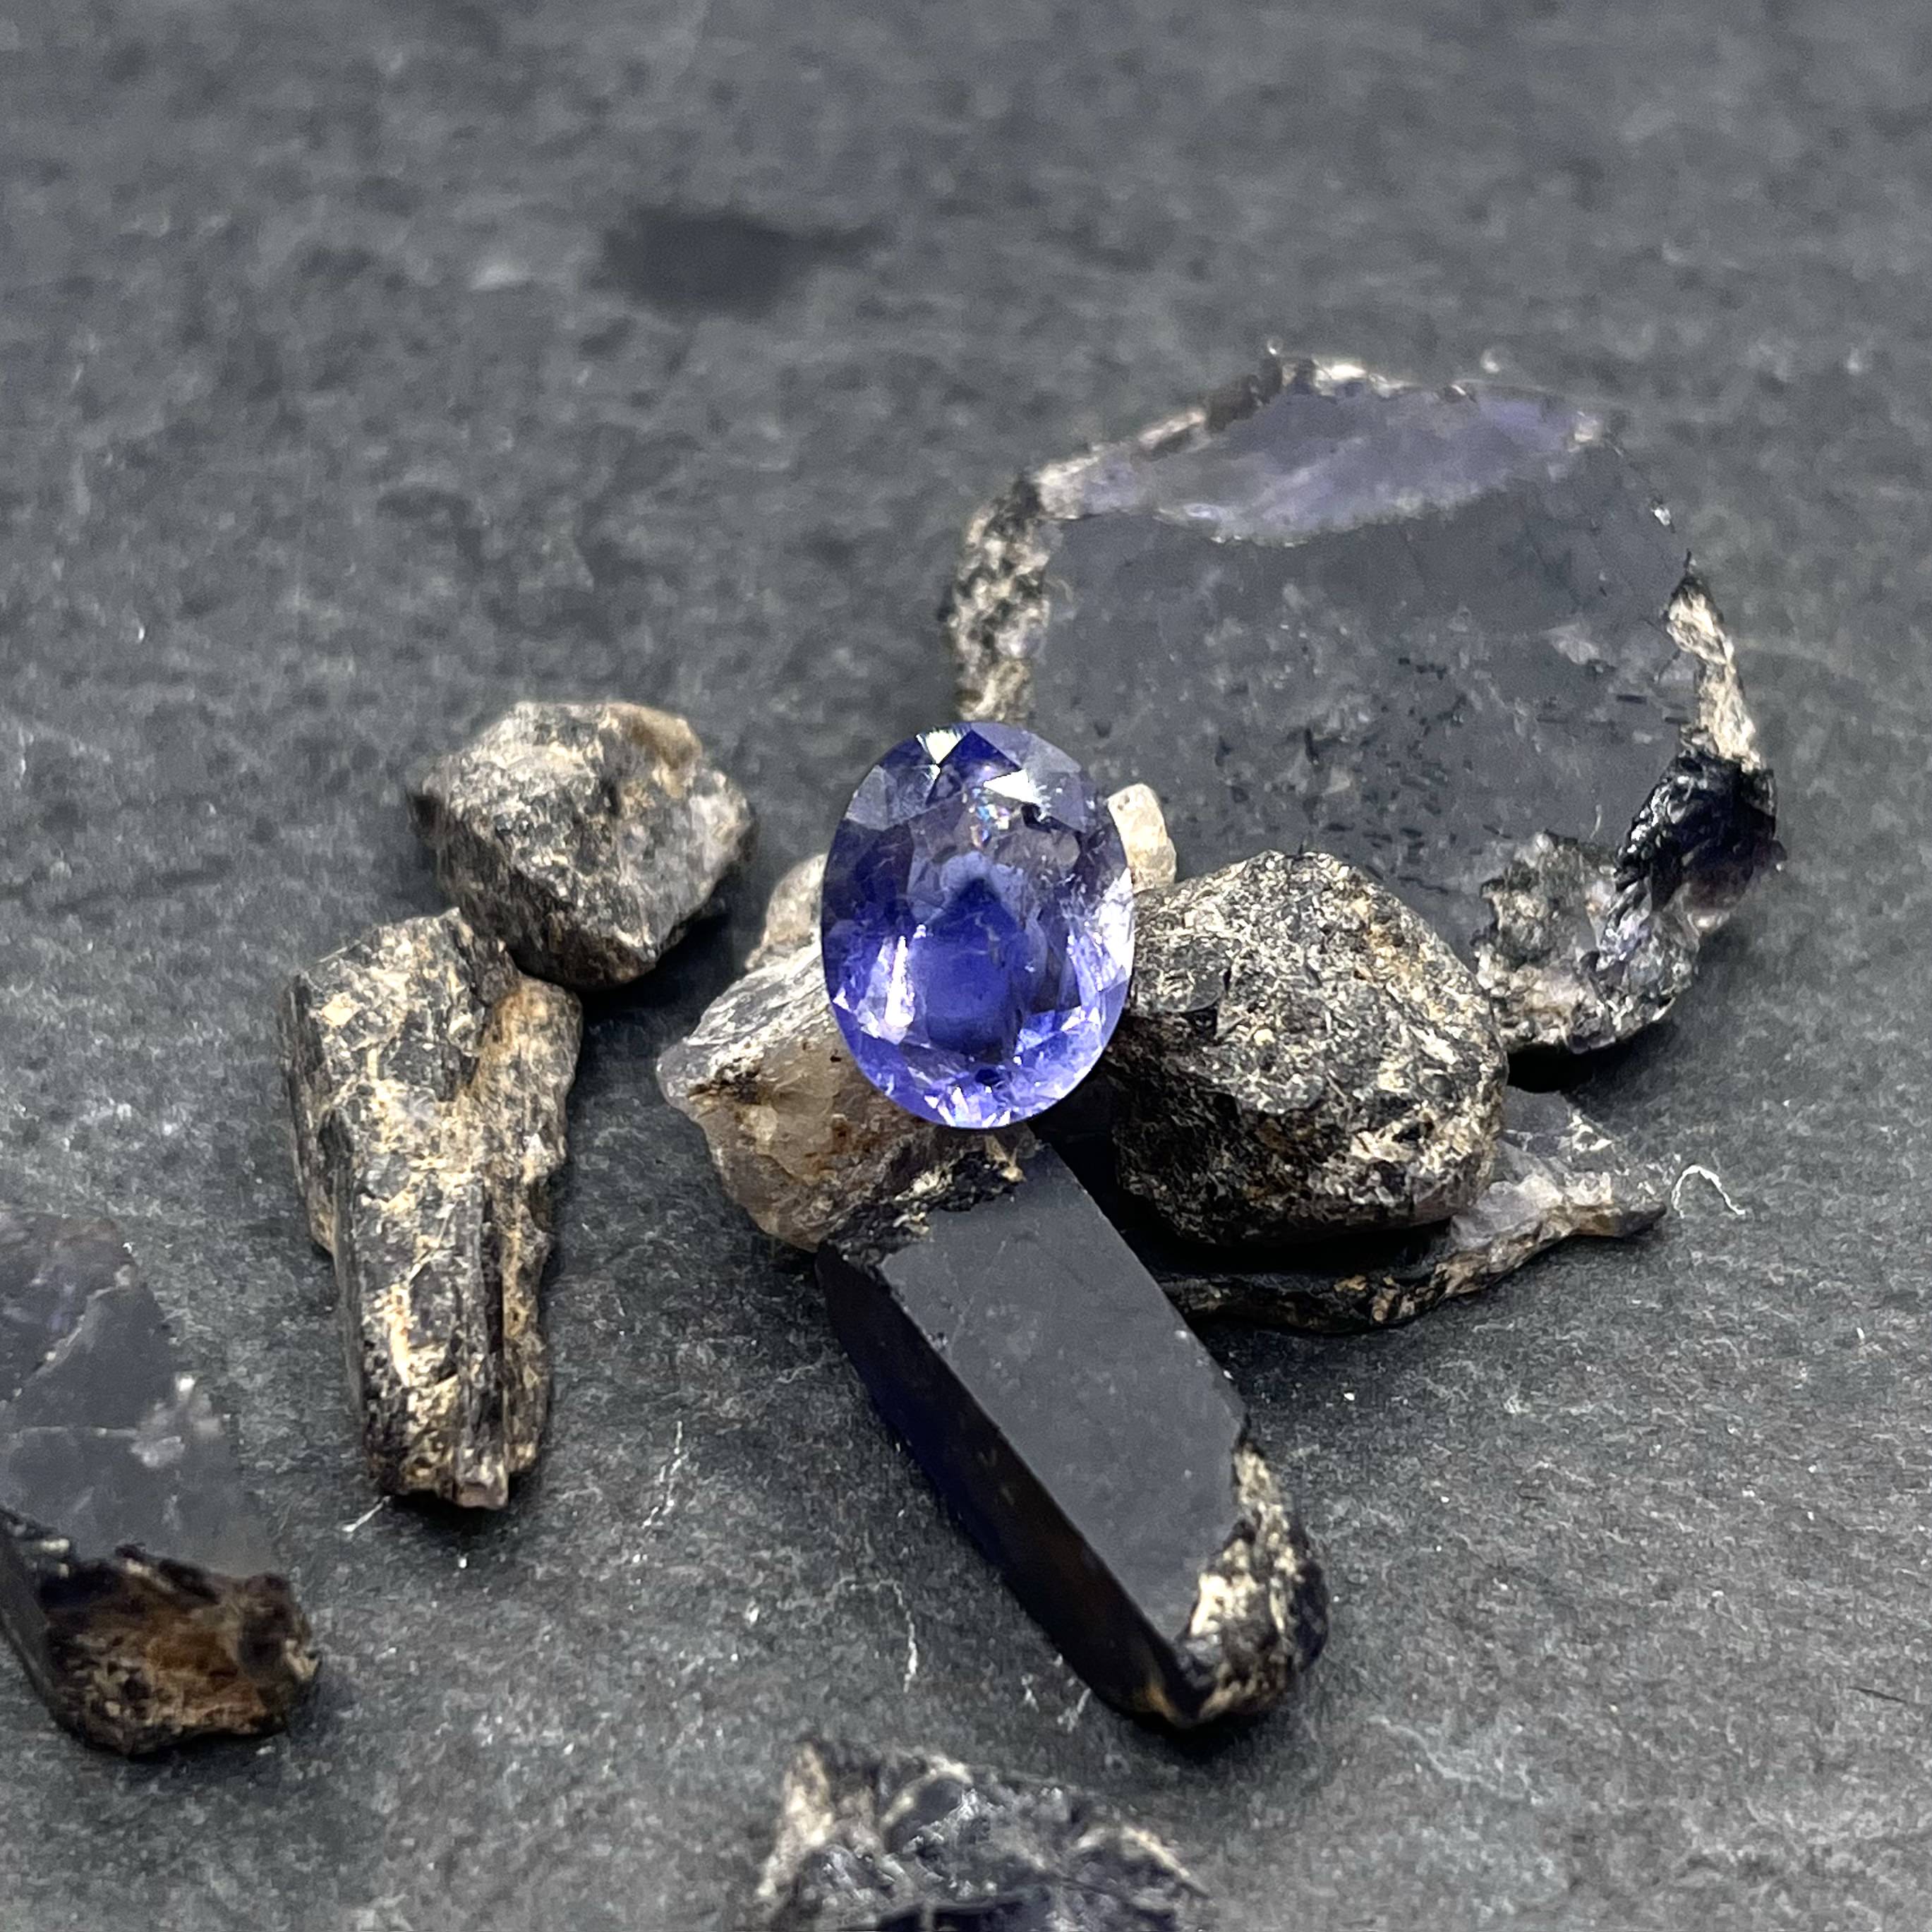 A 3.48ct faceted iolite with one lot of rough iolite crystals.